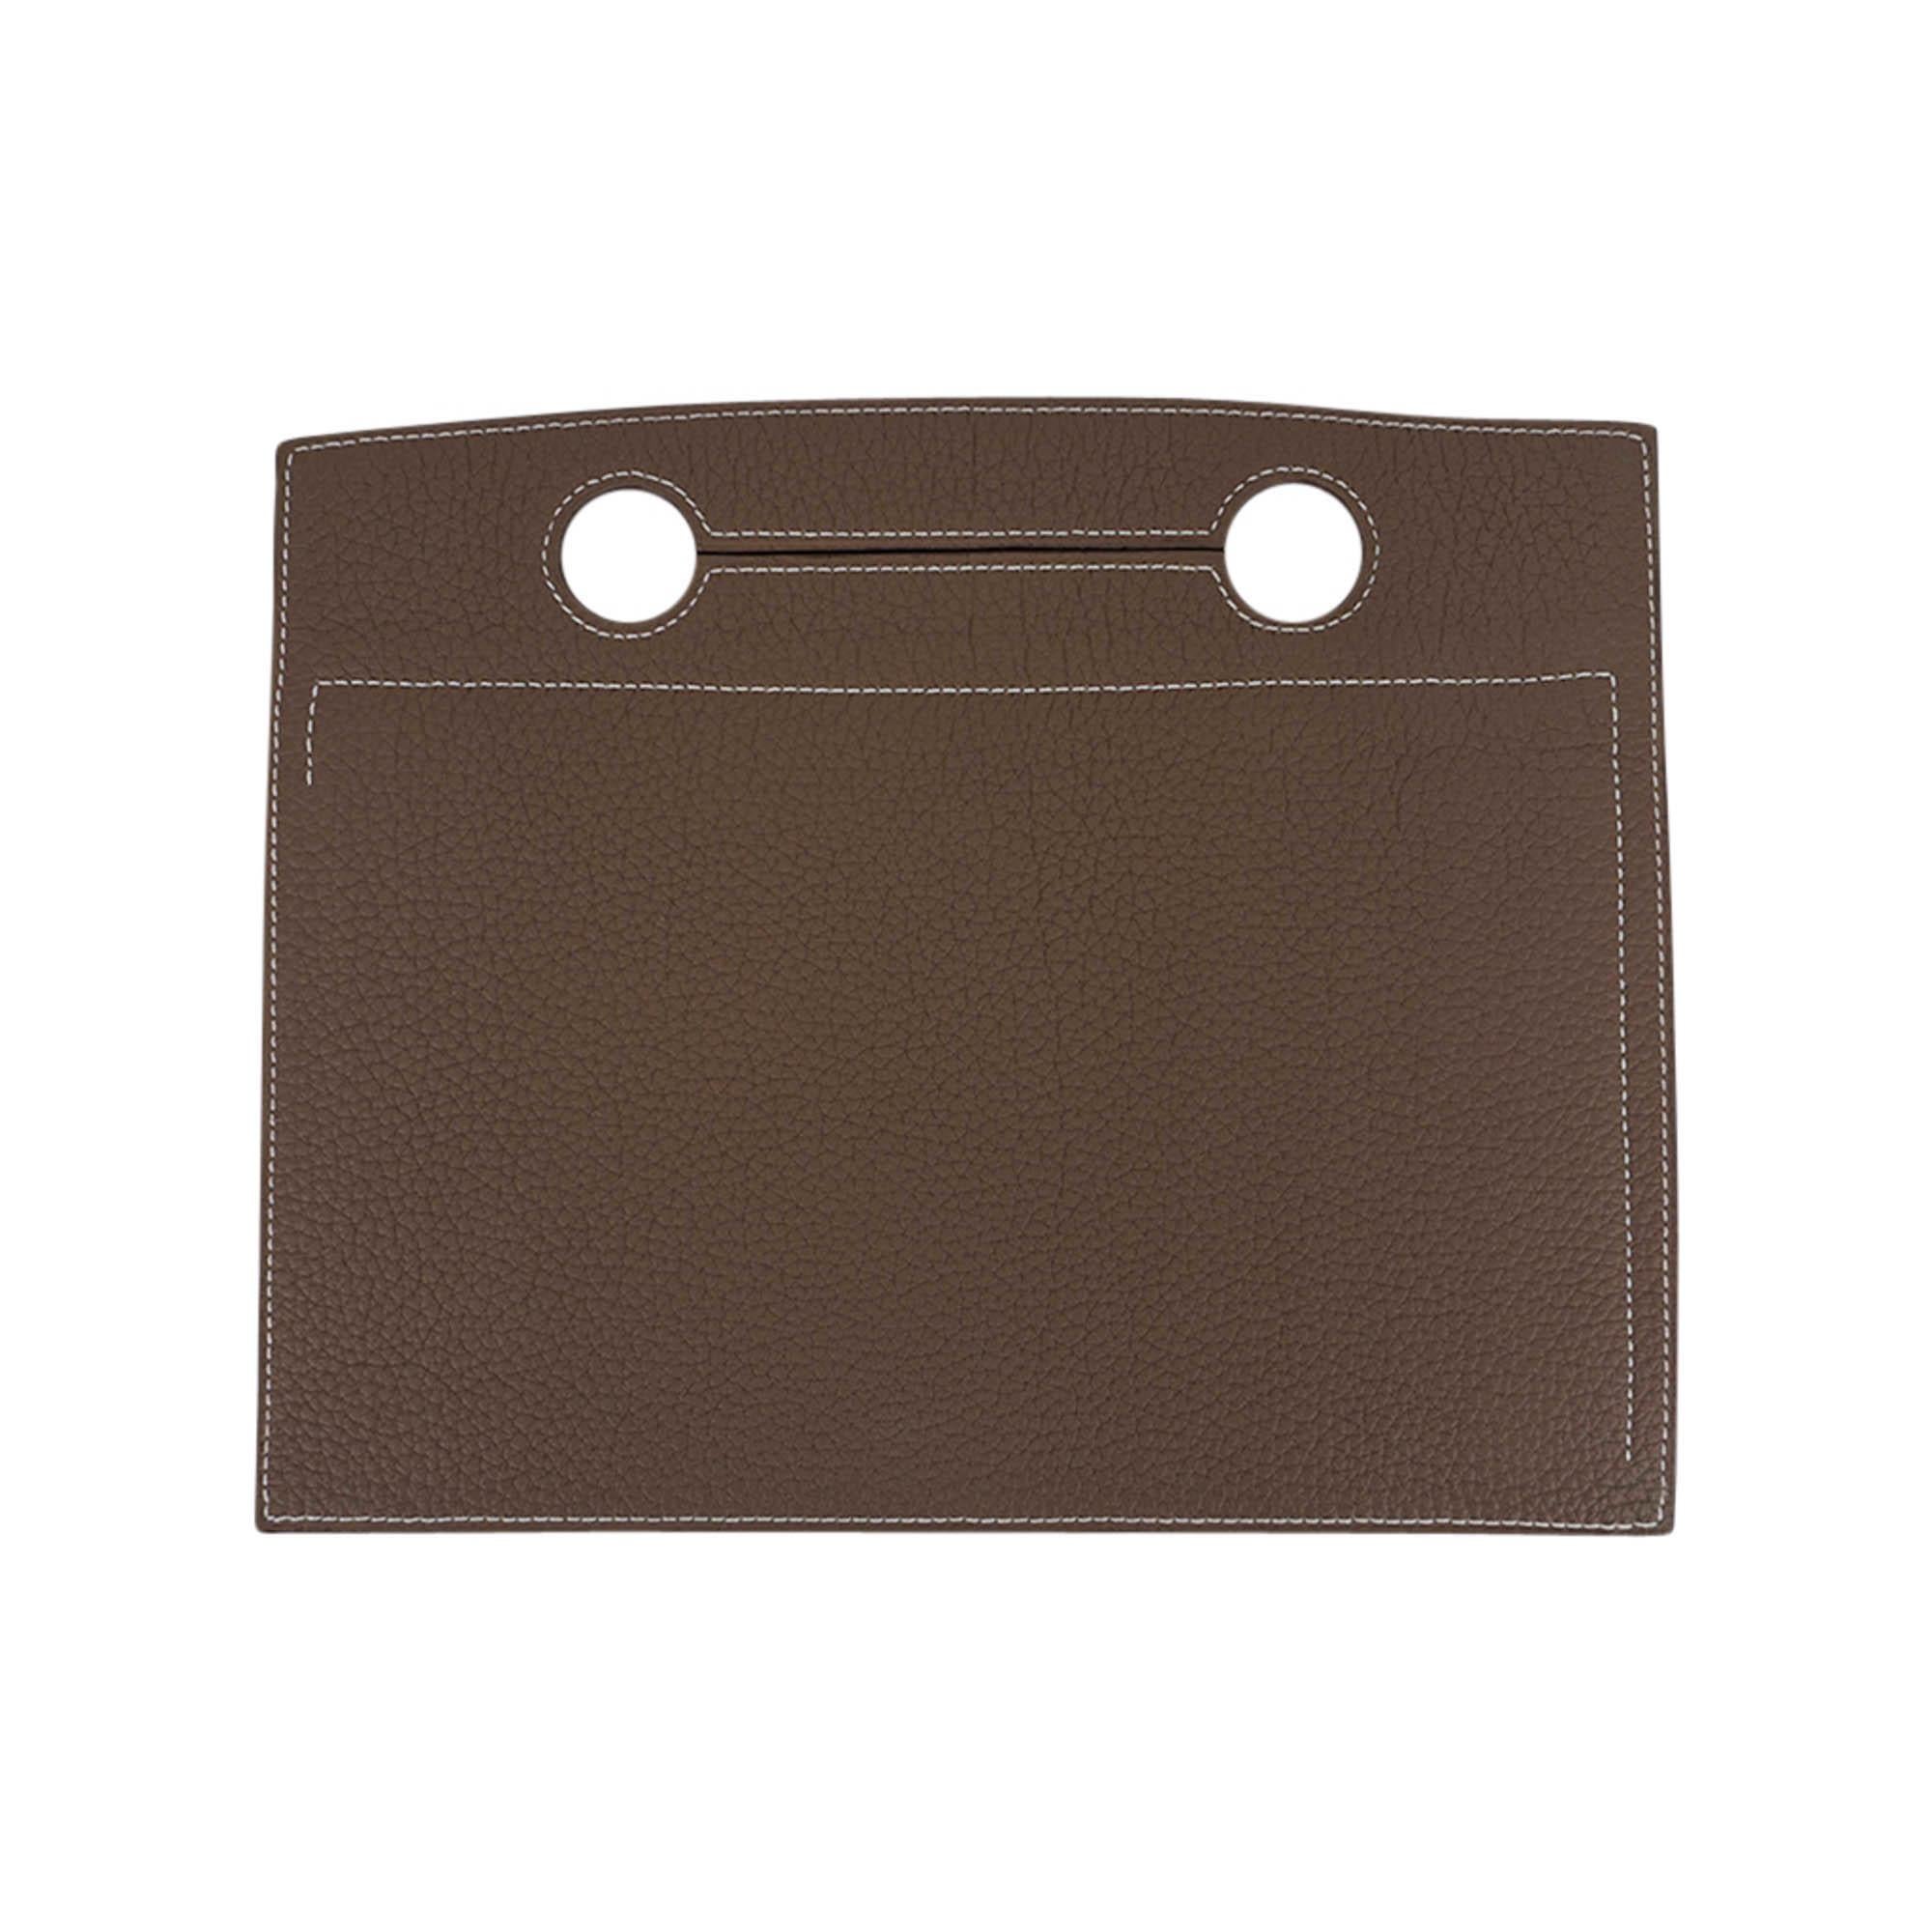 Mightychic offers an Hermes Backpocket 30 Pouch featured in neutral Etoupe.
Beautiful in Togo leather with Palladium zipper.
This flat Backpocket fits easily over the handle and features a partitioned interior.
In a fabulous neutral color!  And fun